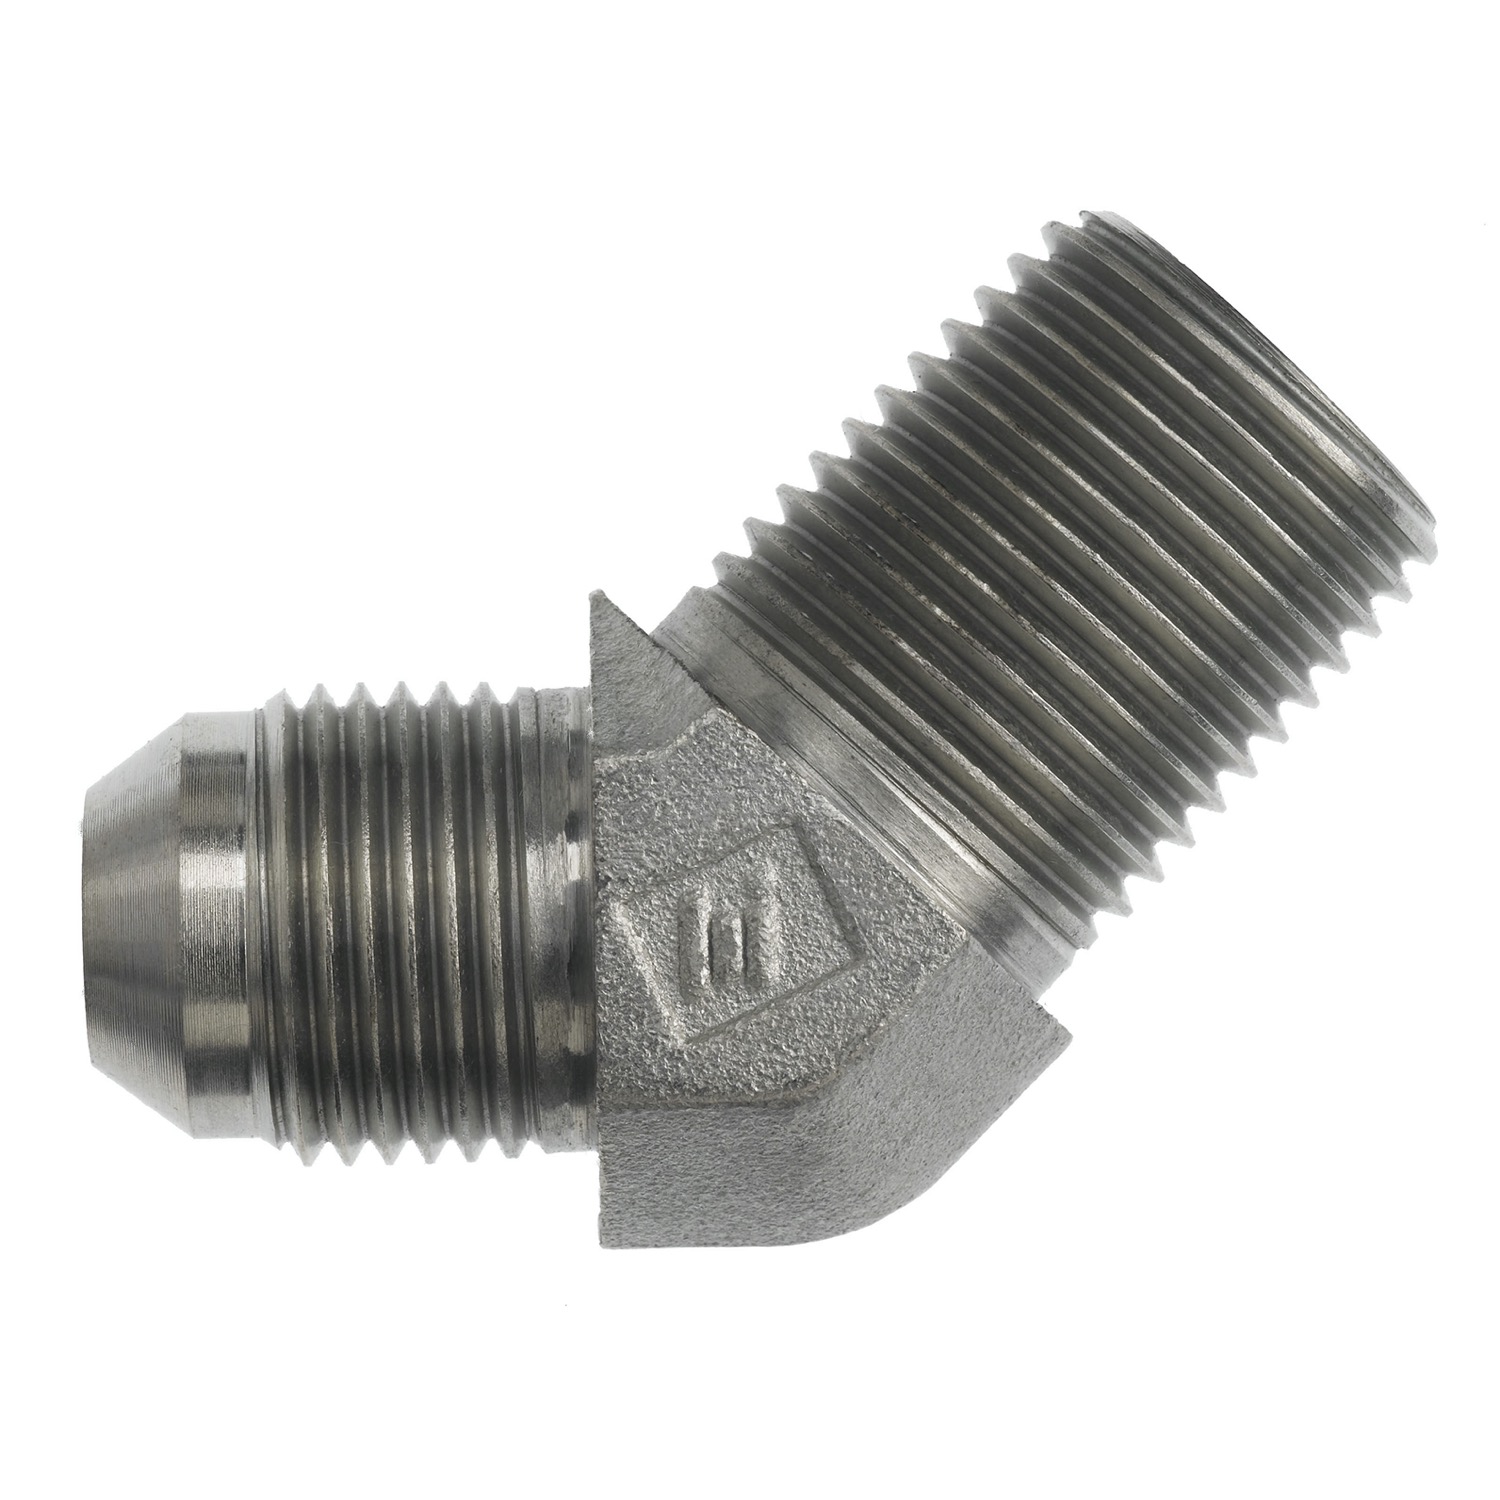 Hydraulic Hose Adapters - Elbow 90° Fitting, JIC 37° Flare to BSPT, 7100 Series